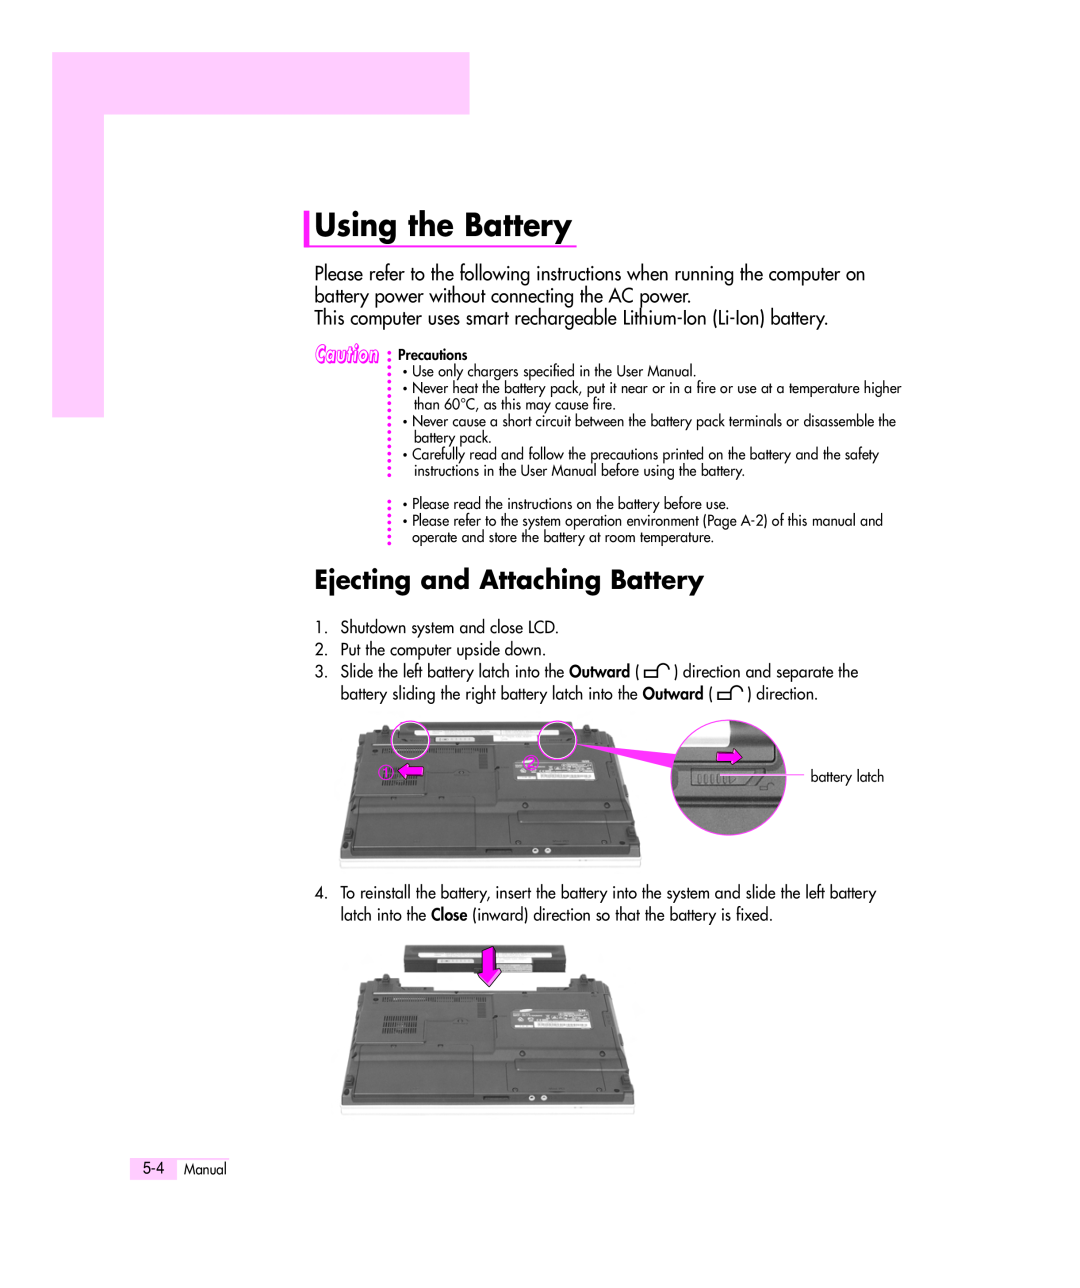 Samsung Q35 manual Using the Battery, Ejecting and Attaching Battery 